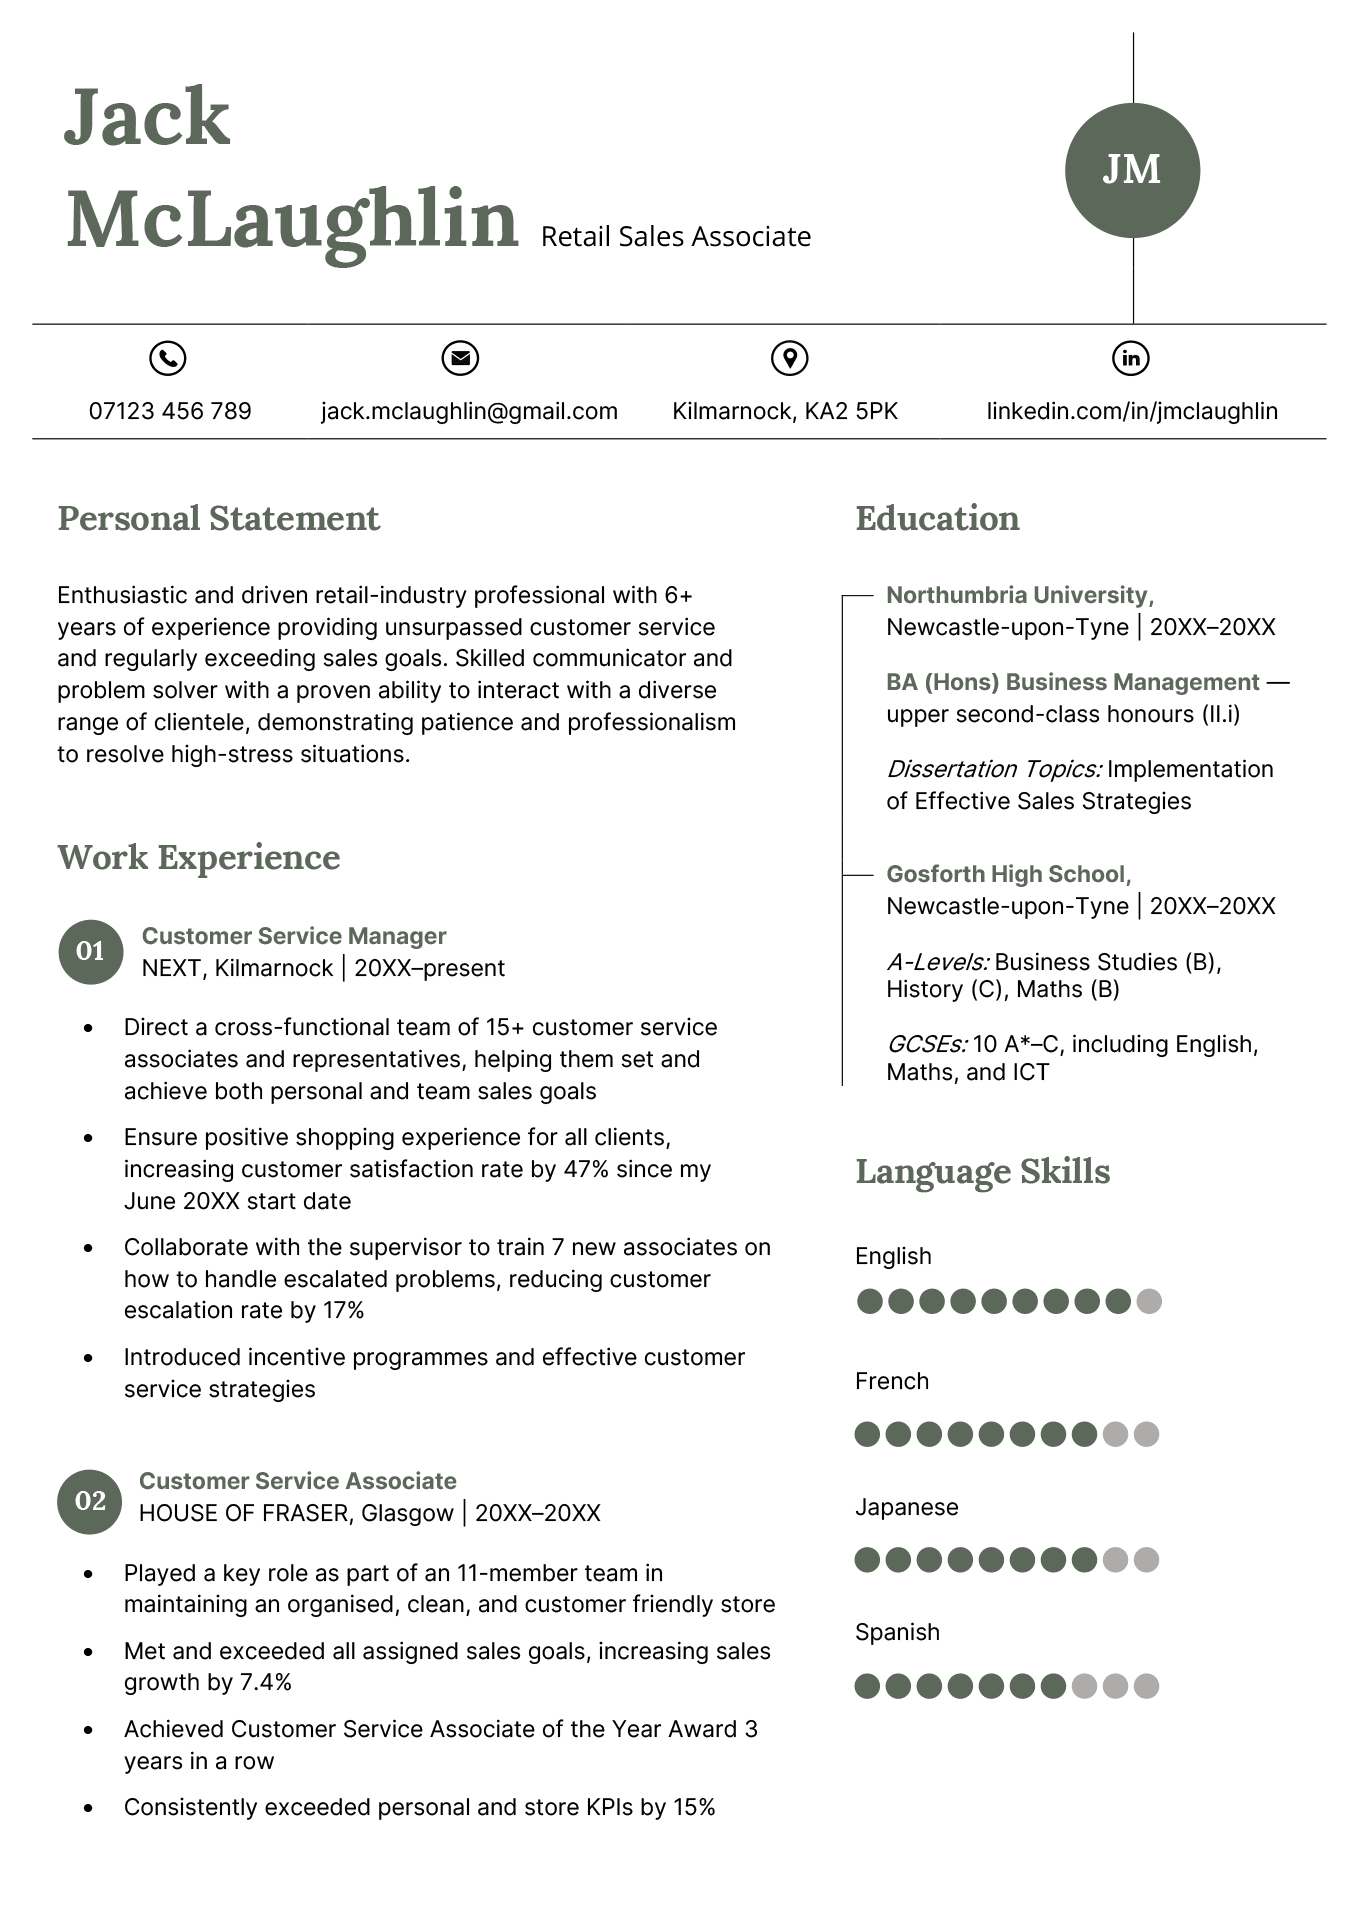 A template for making a creative CV, featuring design elements that can highlight an applicant's skills and education.